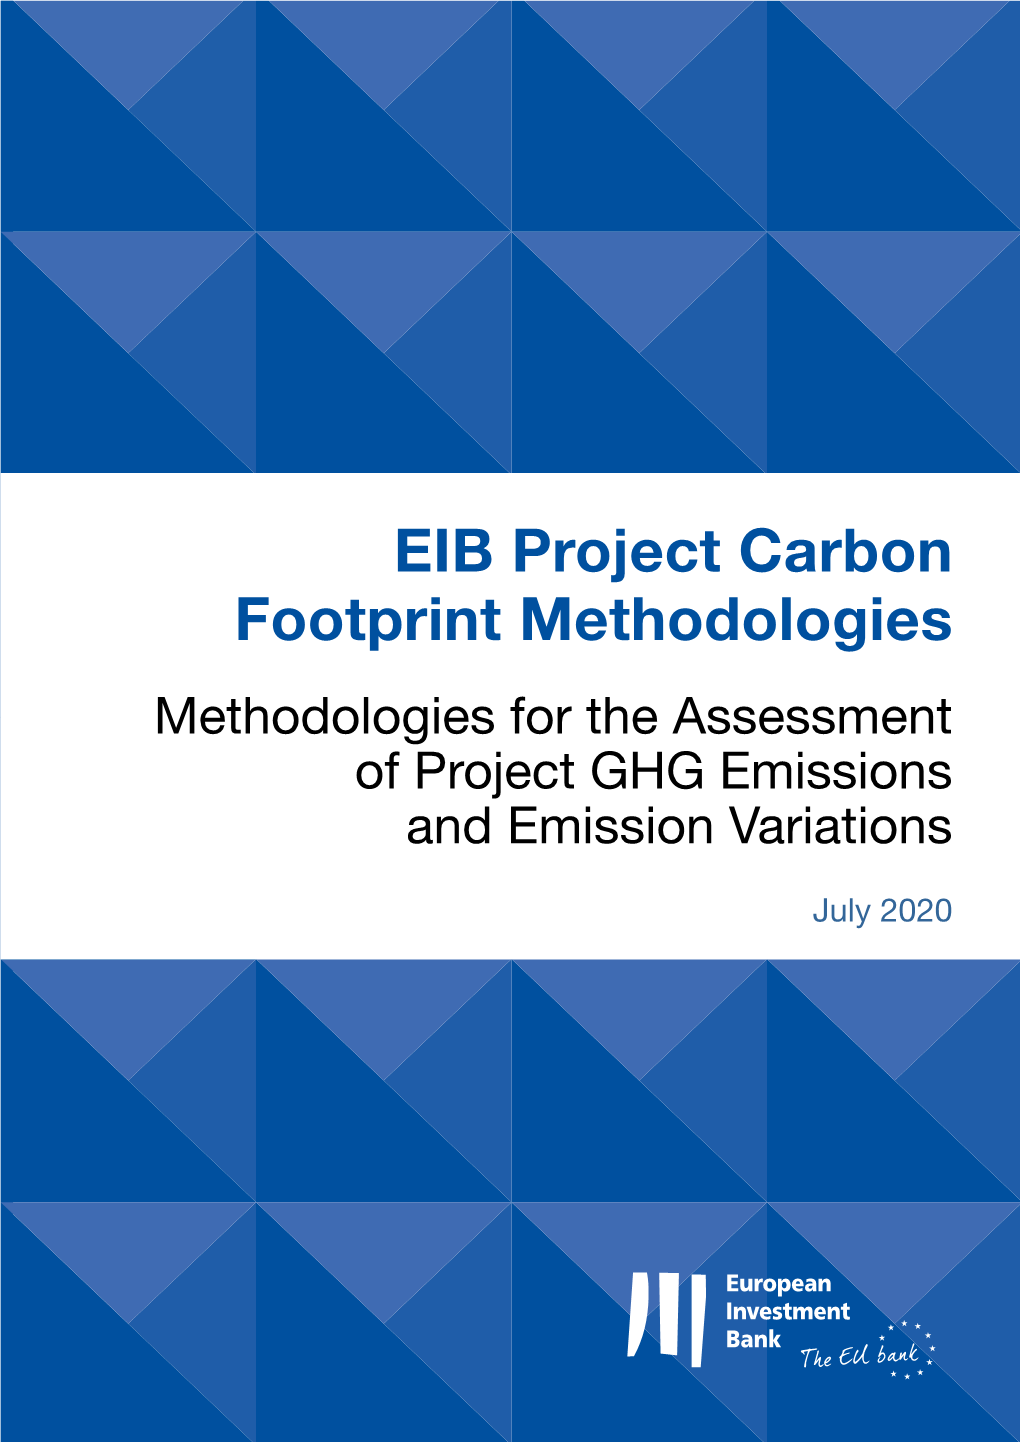 EIB Project Carbon Footprint Methodologies for the Assessment of Project GHG Emissions and Emission Variations